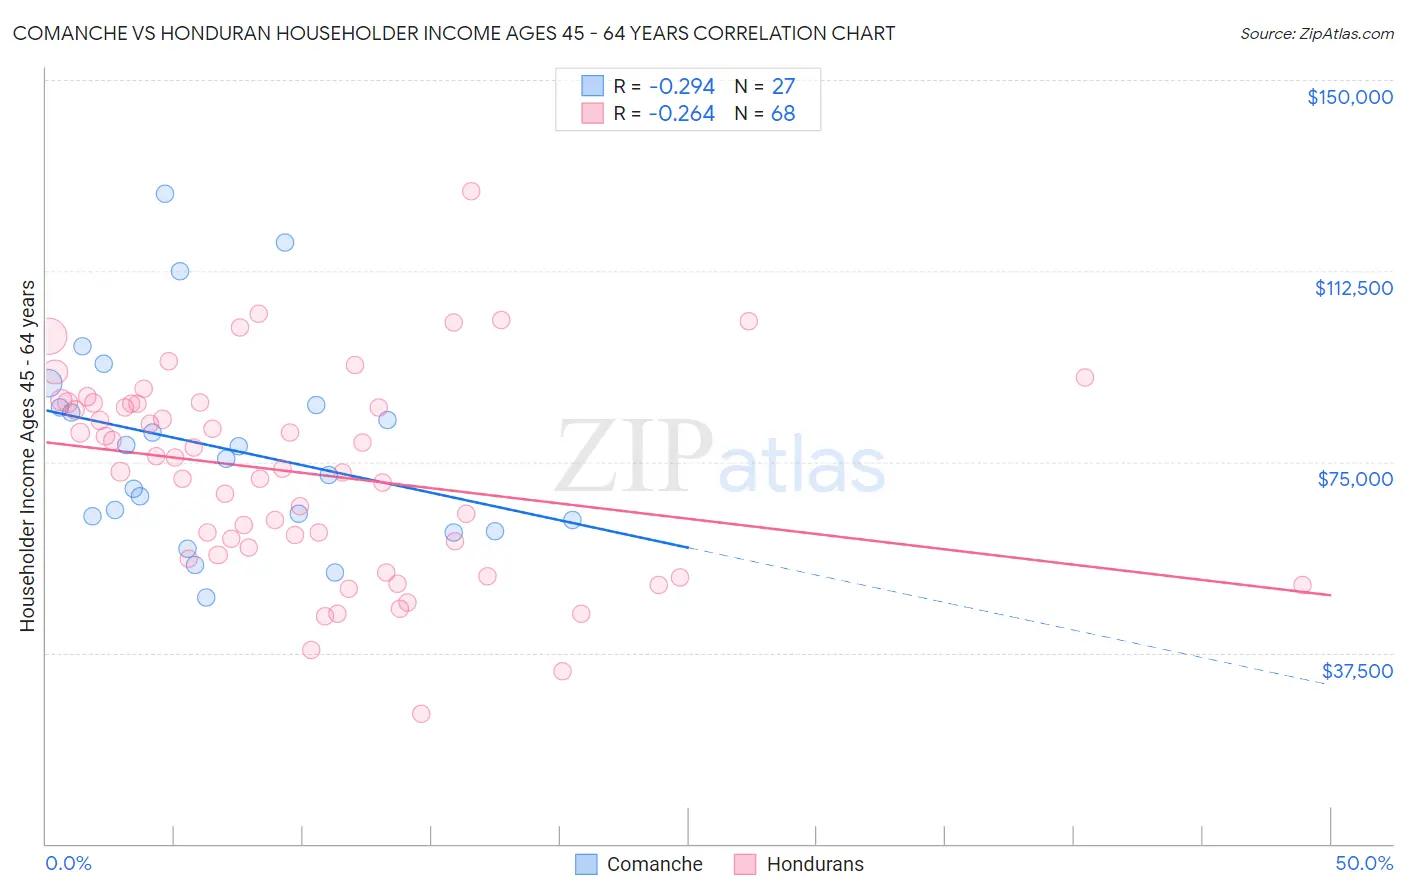 Comanche vs Honduran Householder Income Ages 45 - 64 years